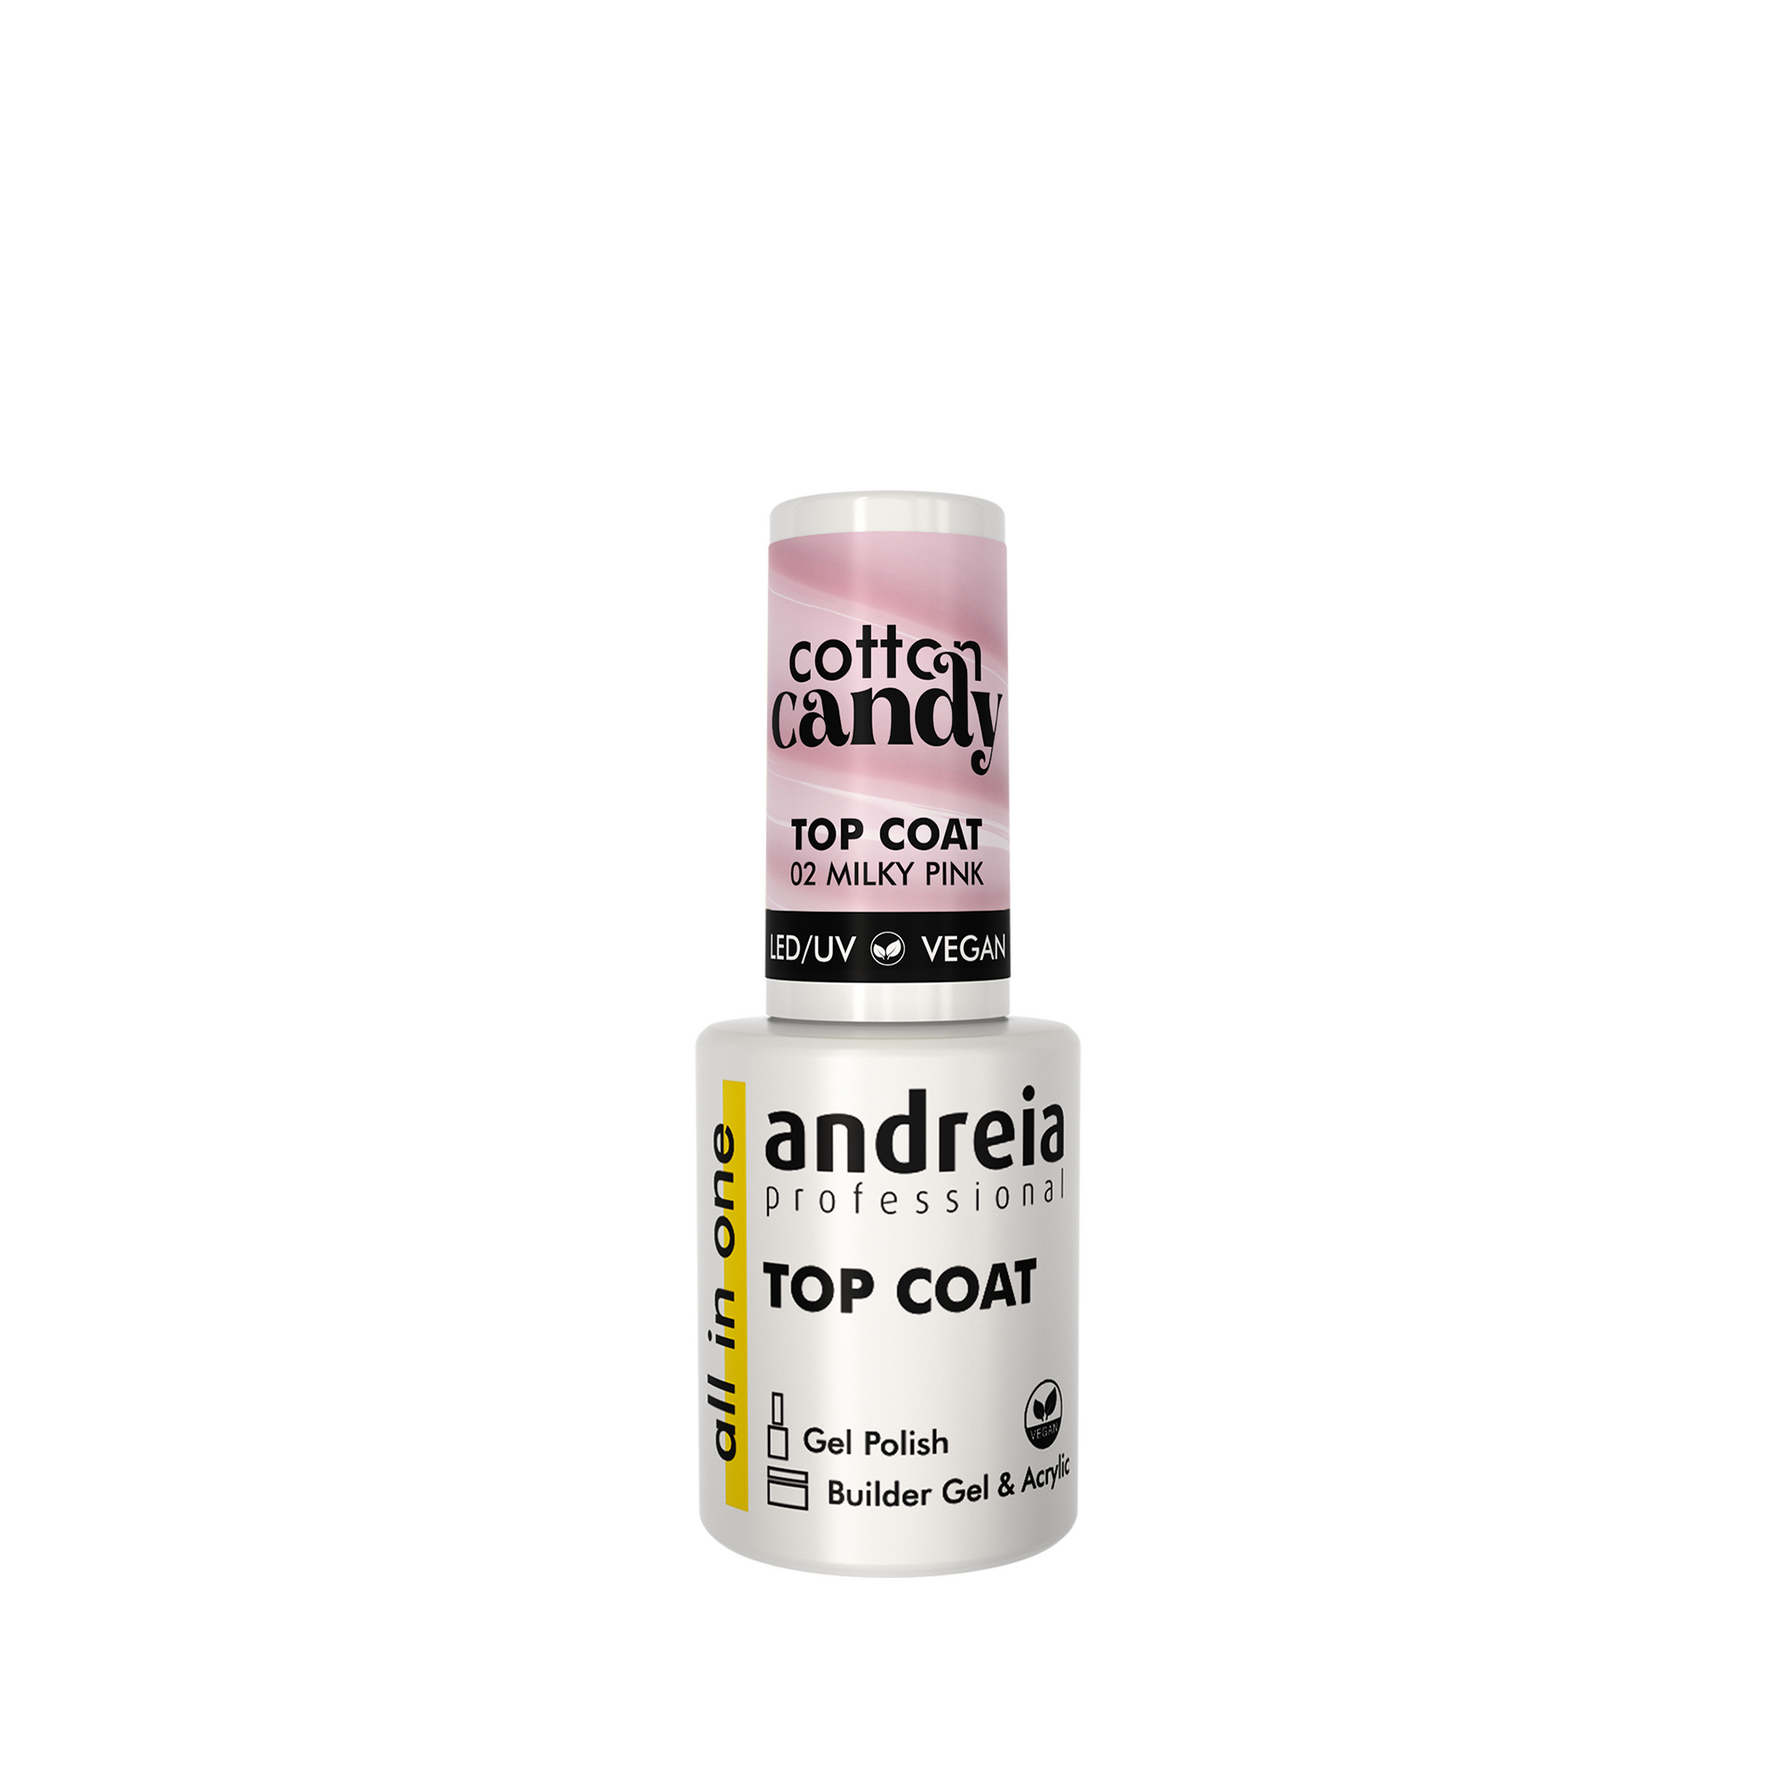 All In One Cotton Candy Top Coat - 02 Milky Pink